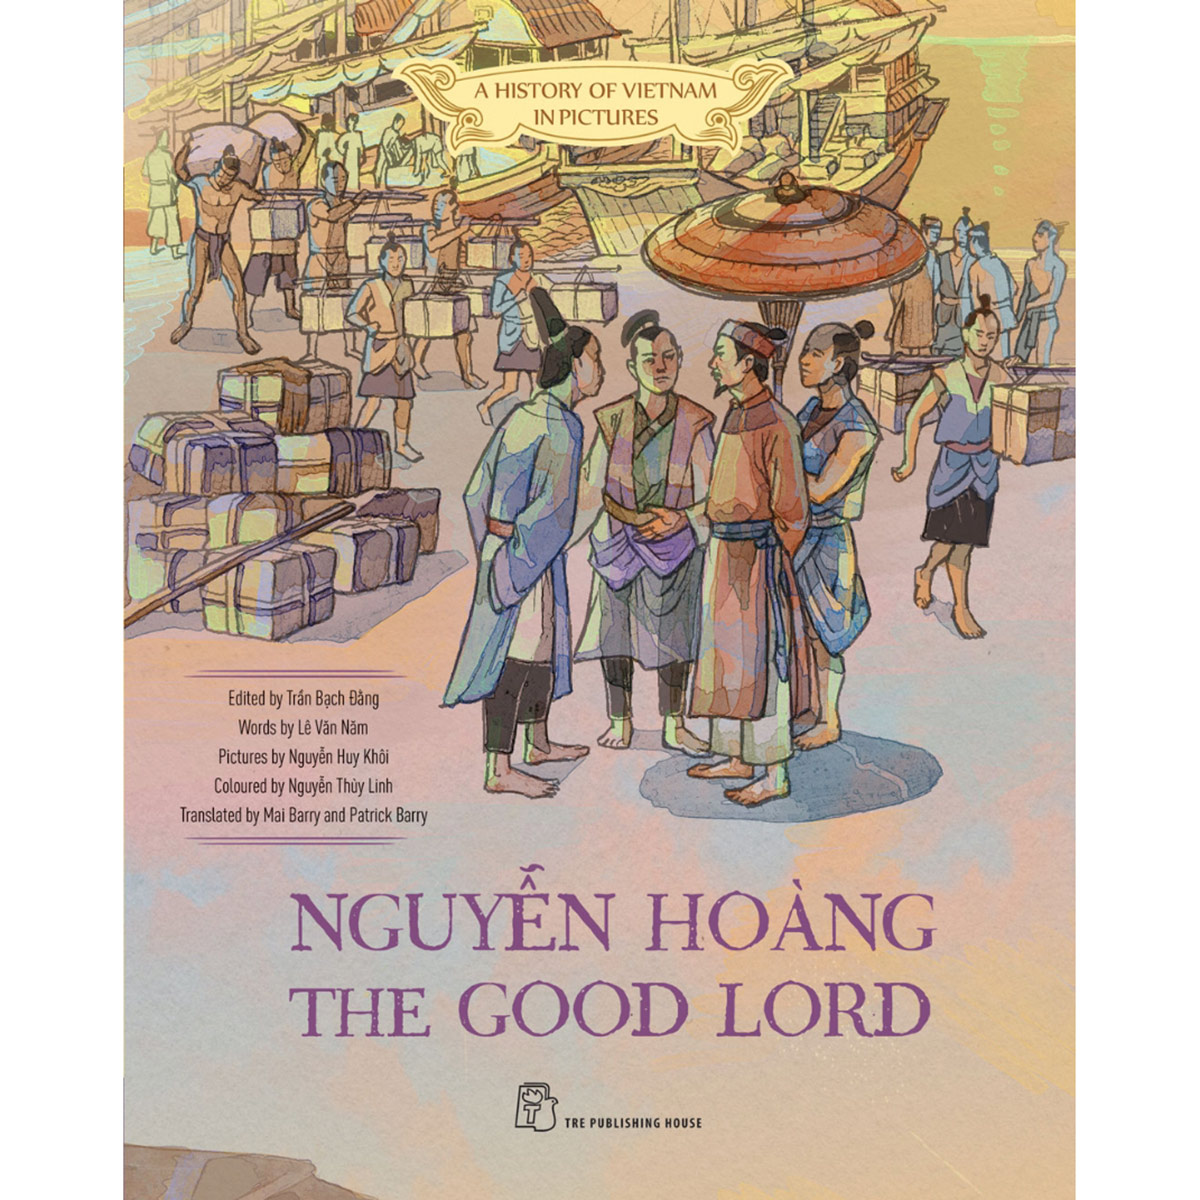 A History of Vietnam in Pictures: Nguyễn Hoàng the Good Lord (In Colour)